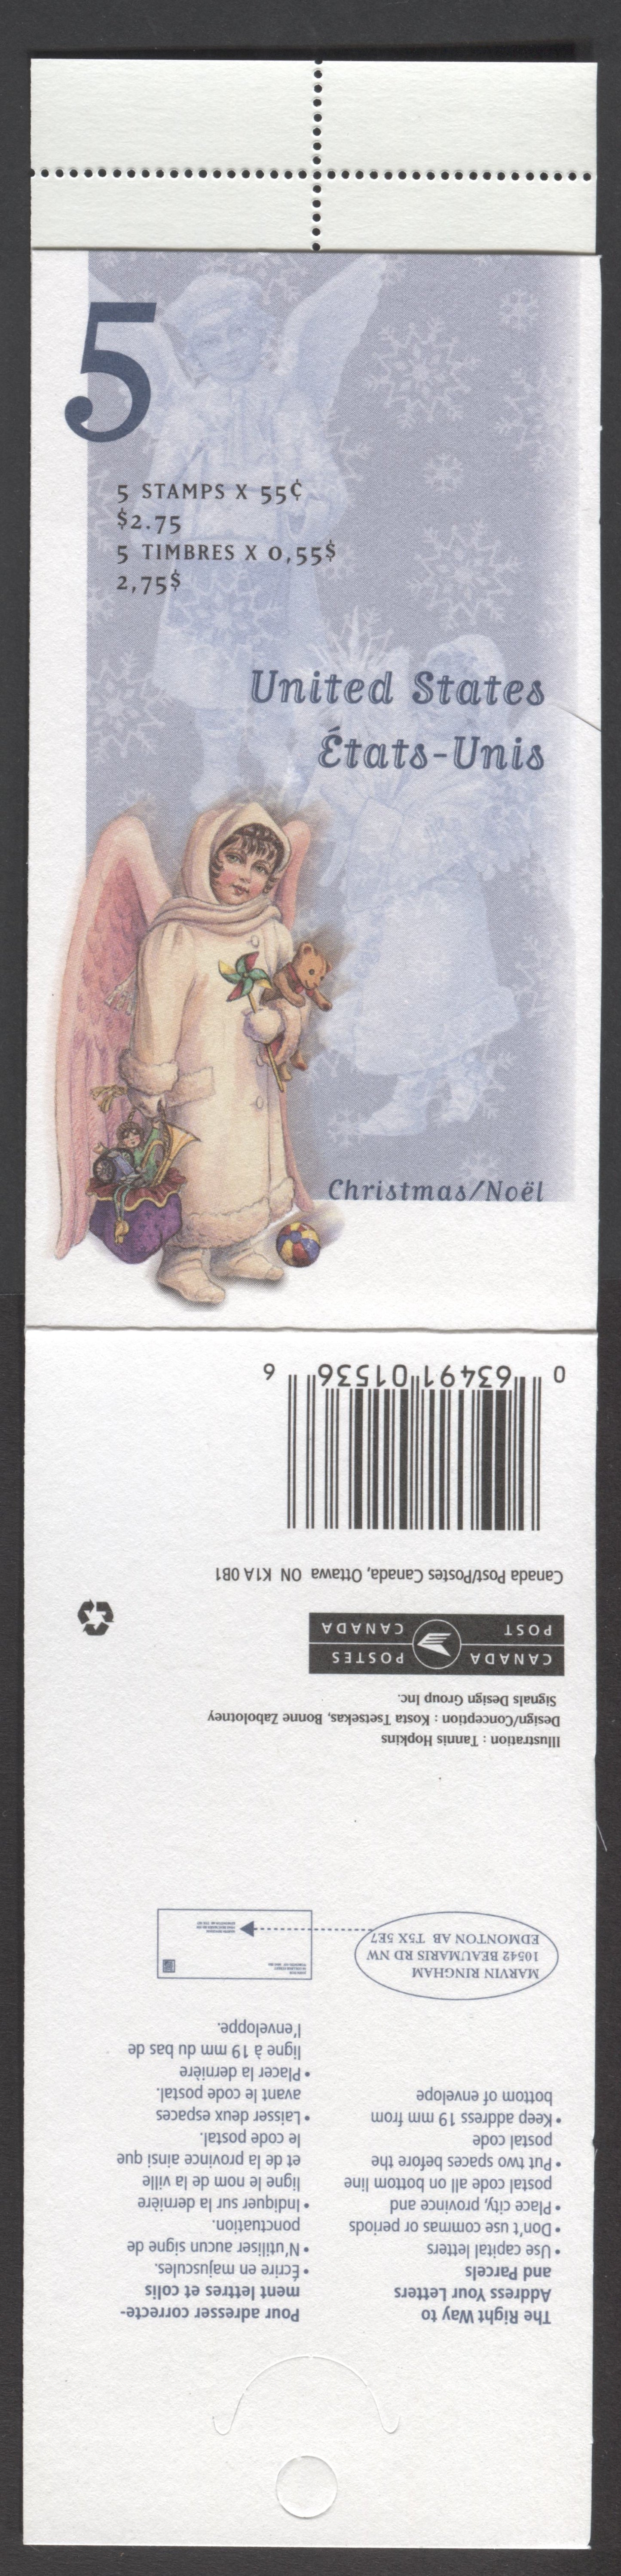 Canada #BK223a 1999 Christmas Issue, Complete $2.75 Booklet, Tullis Russell Coatings Paper, Dead Paper, 4 mm GT-4 Tagging